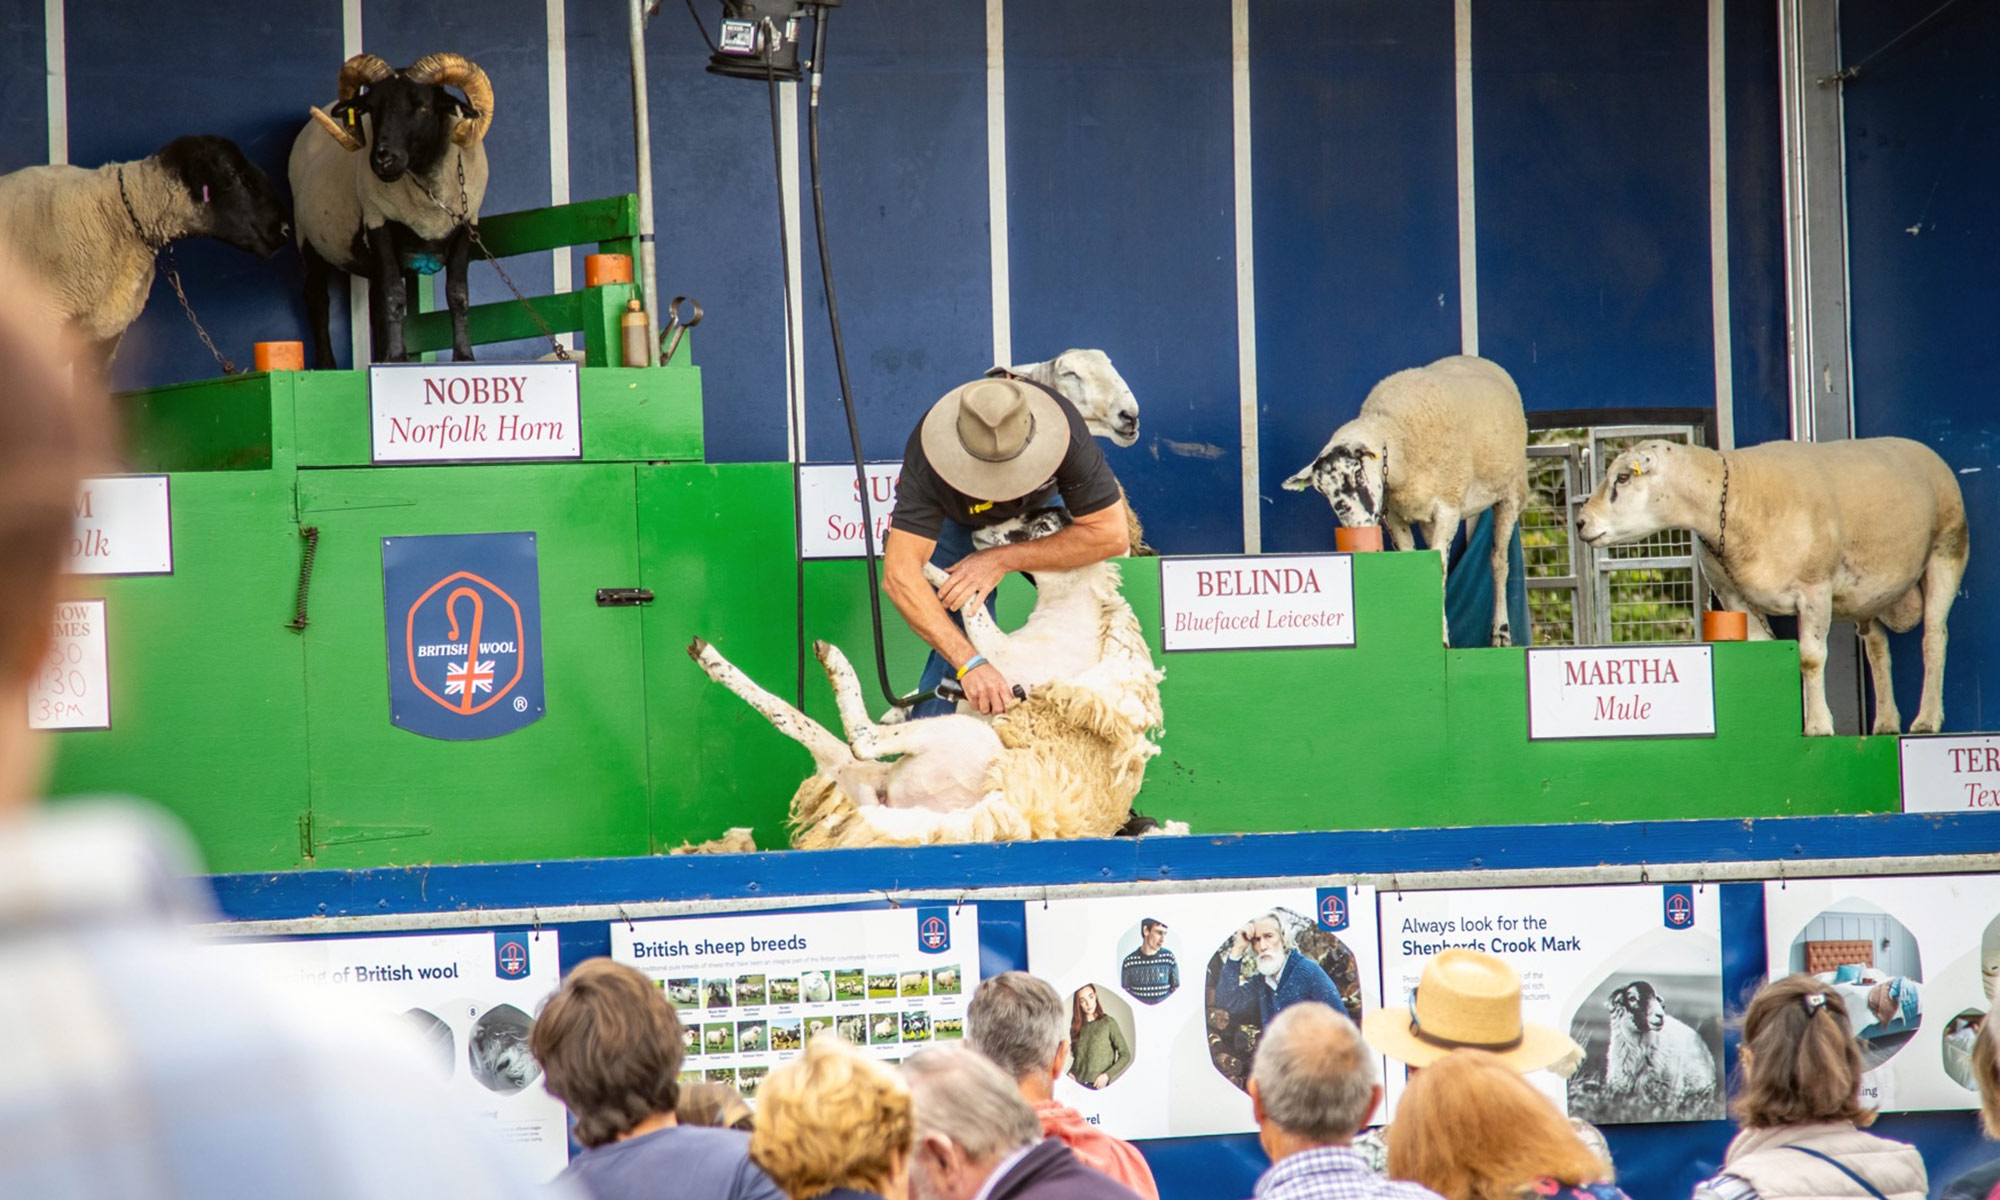 man shearing a sheep on stage